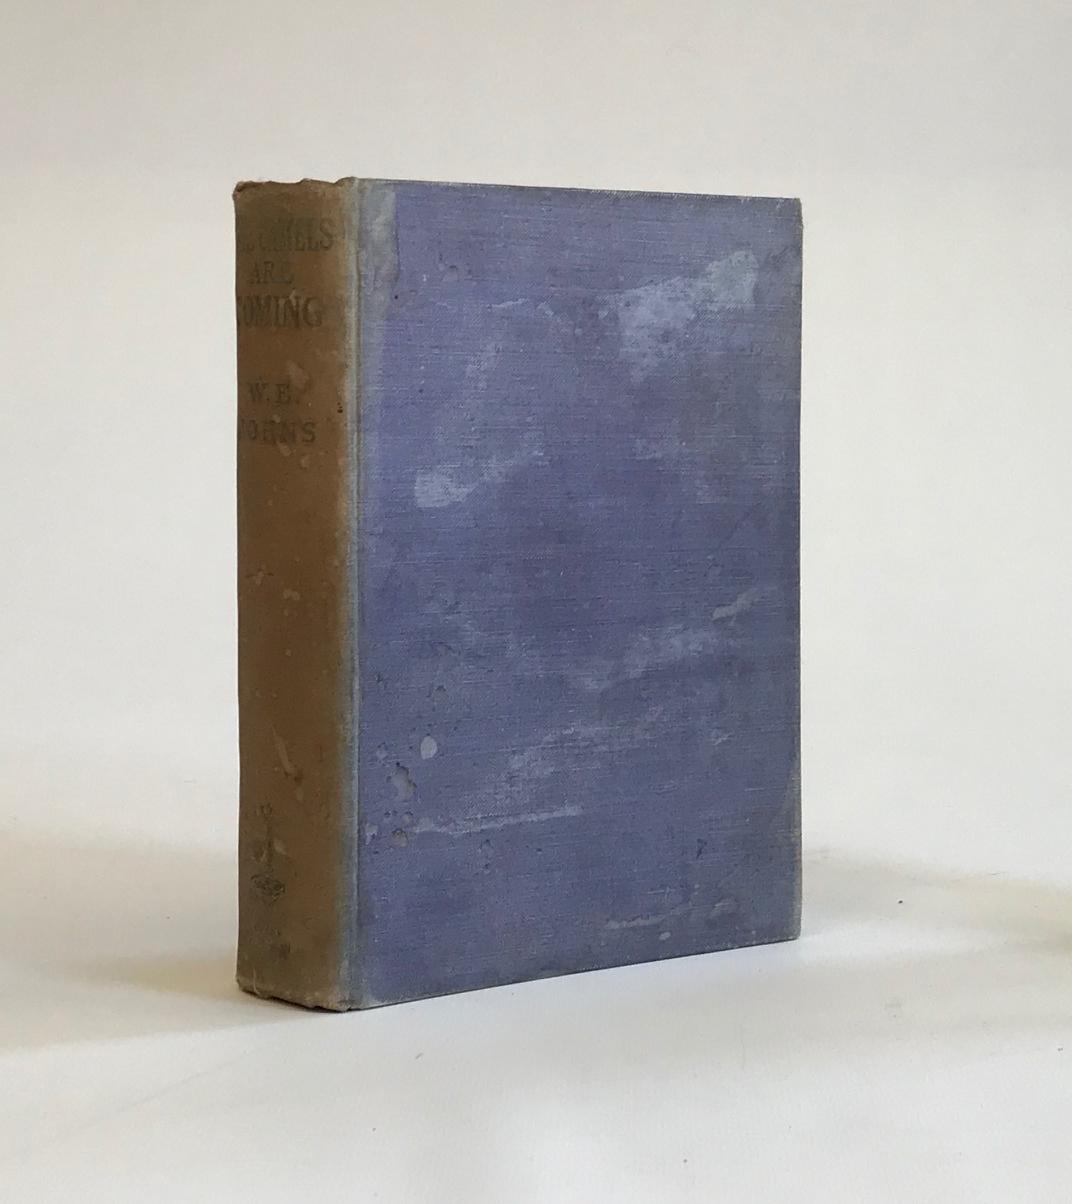 BIGGLES, THE CAMELS ARE COMING, [1934] W.E. Johns, John Hamilton; stained boards, faded spine,